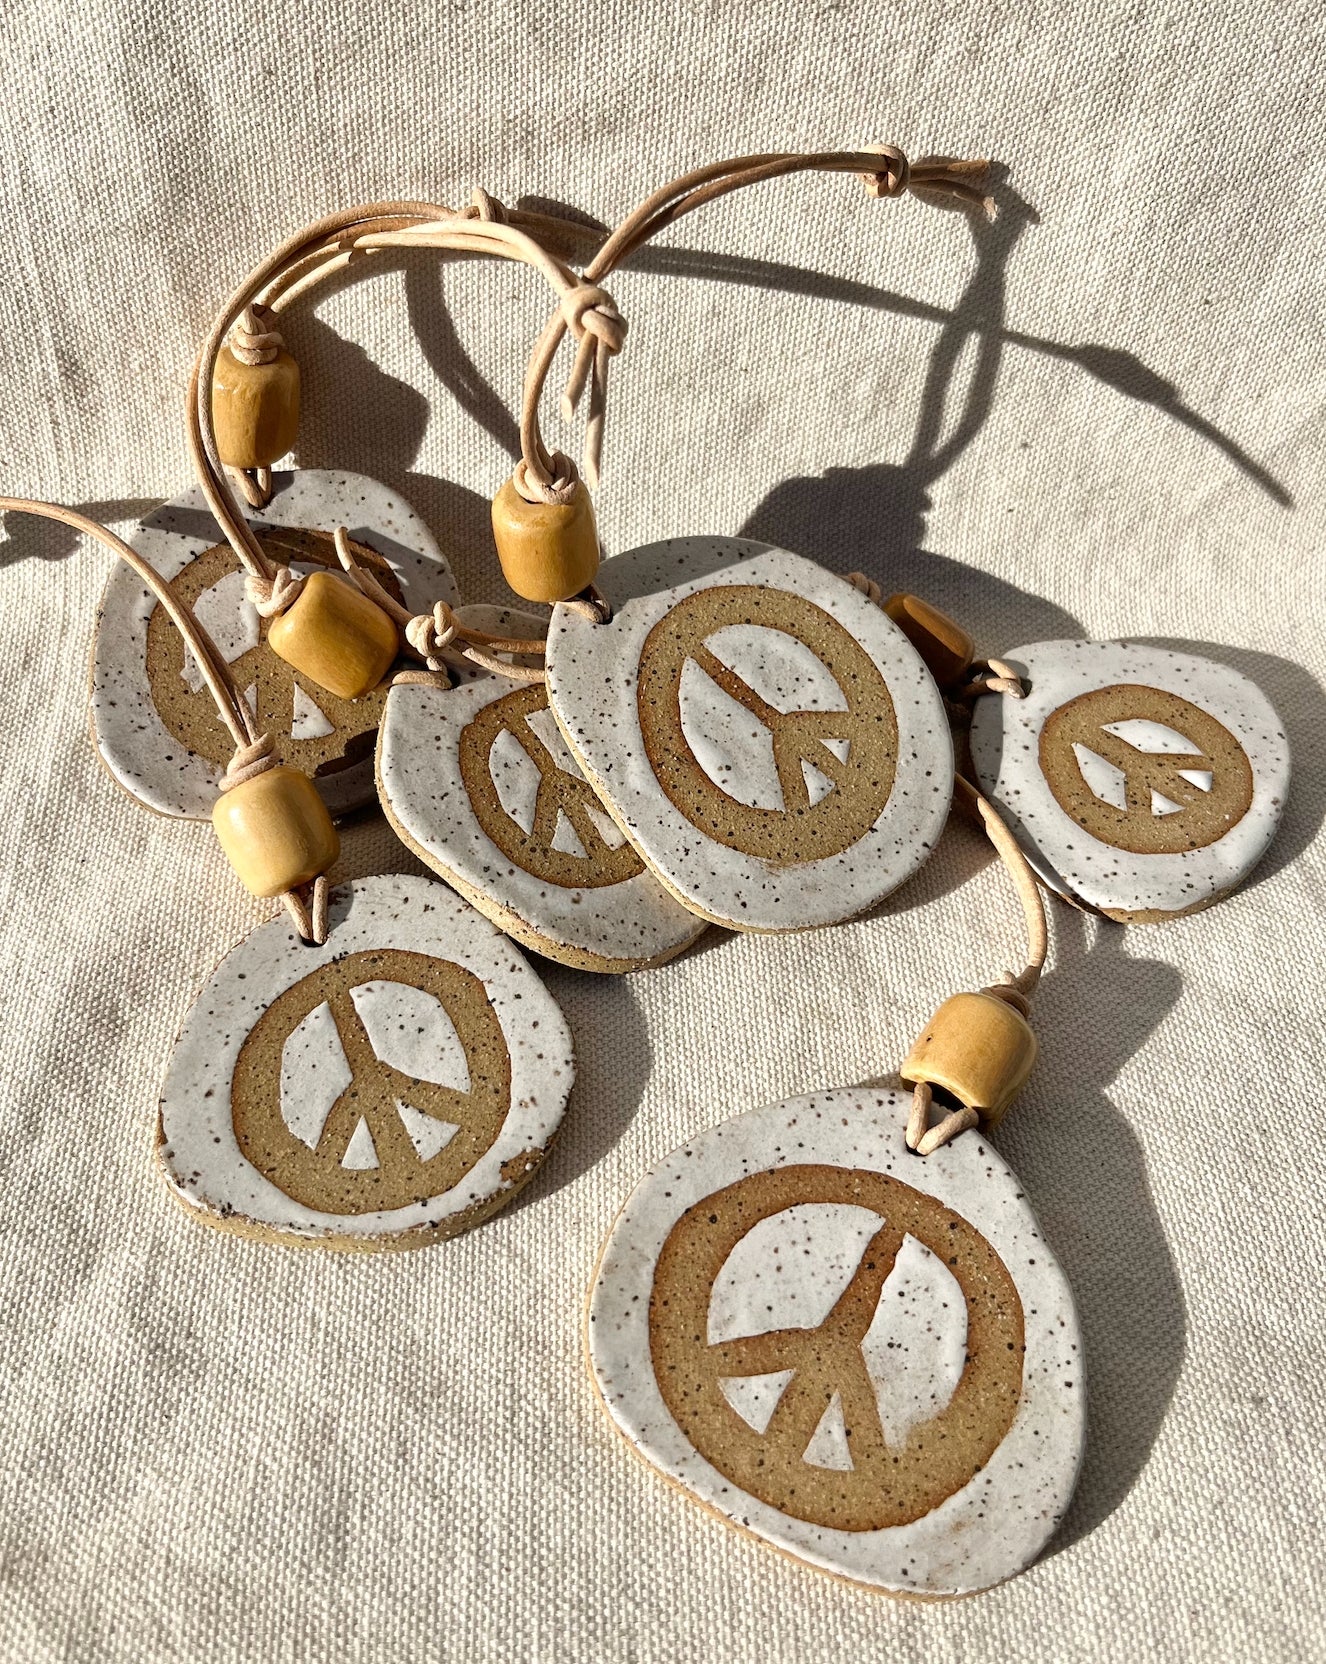 Add a hint of peace to your space with these peace offerings. Speckled clay peace signs adorned with a vintage wooden bead and leather cord. Hand built, glazed and fired in SLO, Ca.